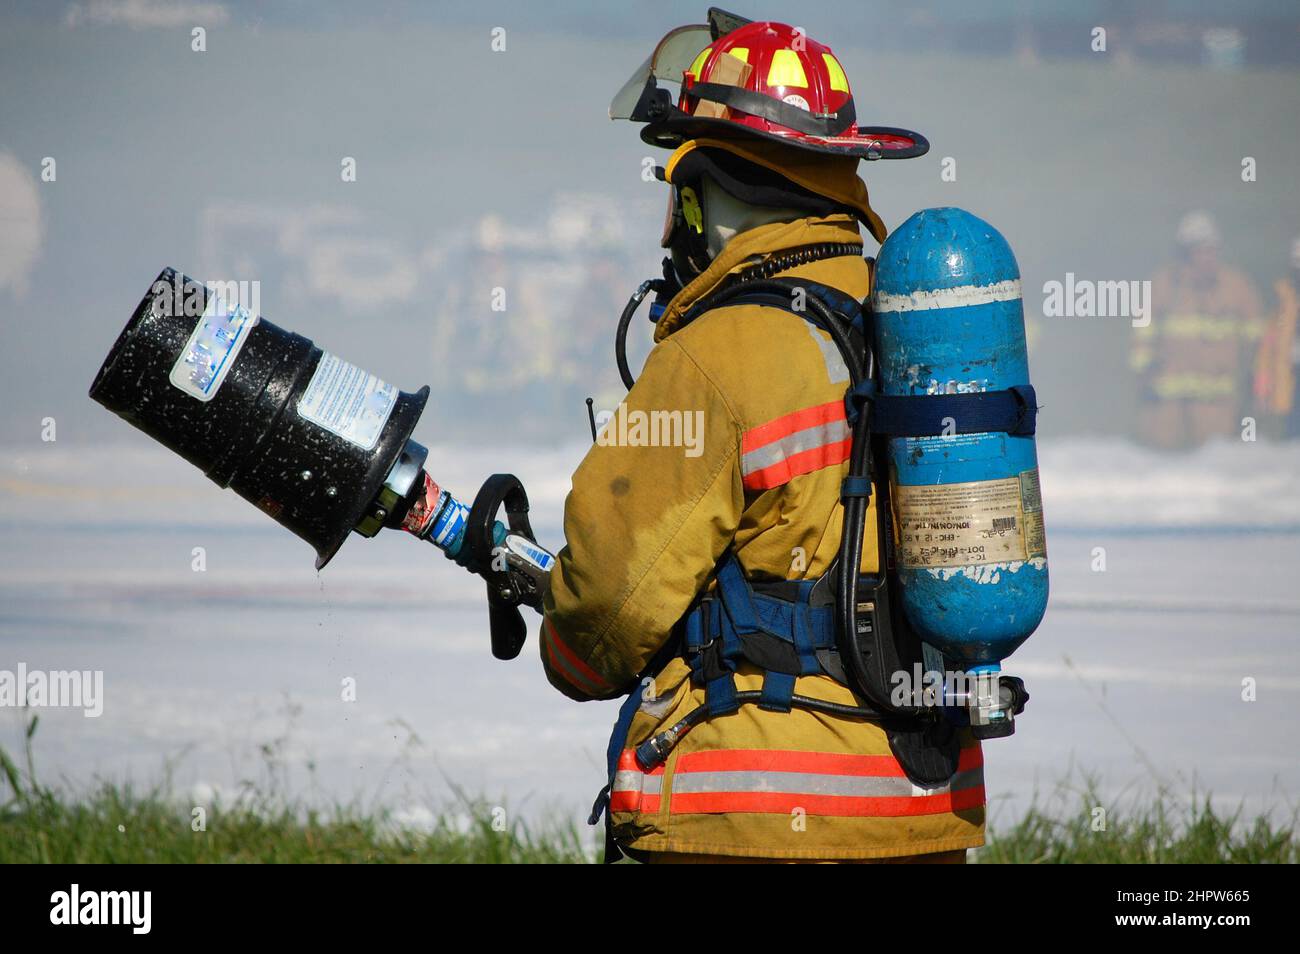 Firefighter in full turnout gear and self-contained breathing apparatus stands ready with foam nozzle Stock Photo